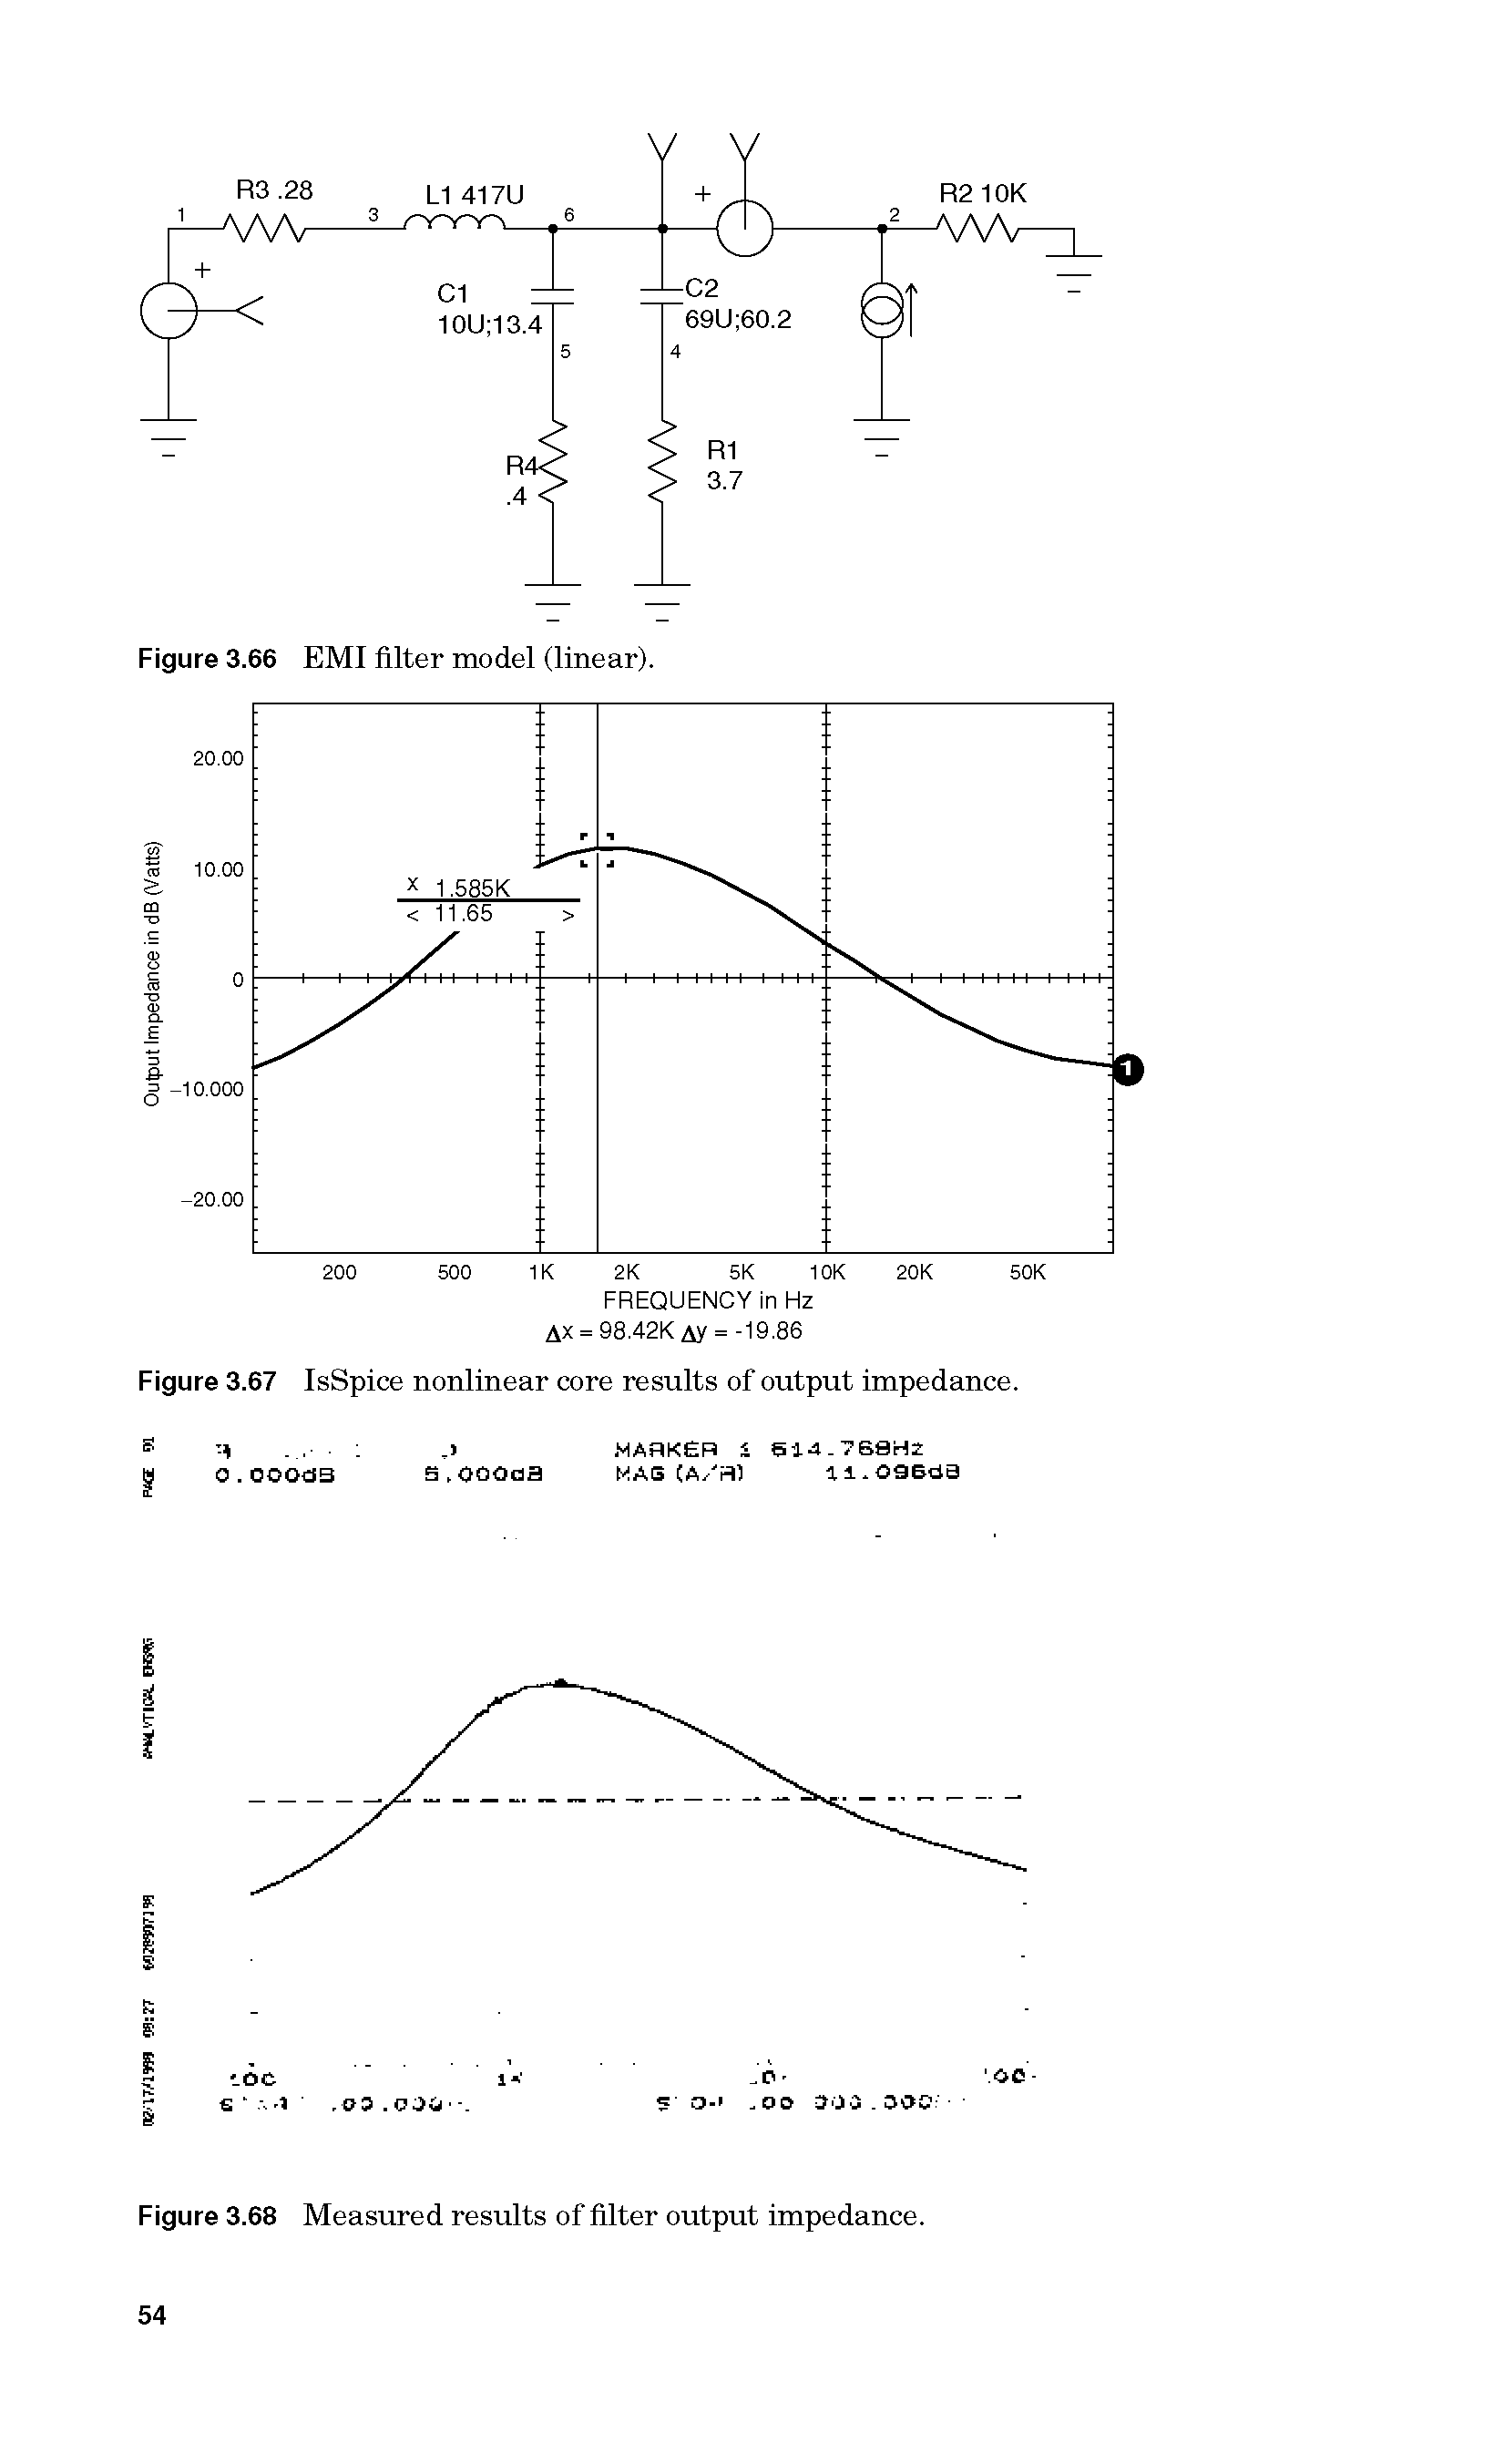 Figure 3.68 Measured results of filter output impedance.